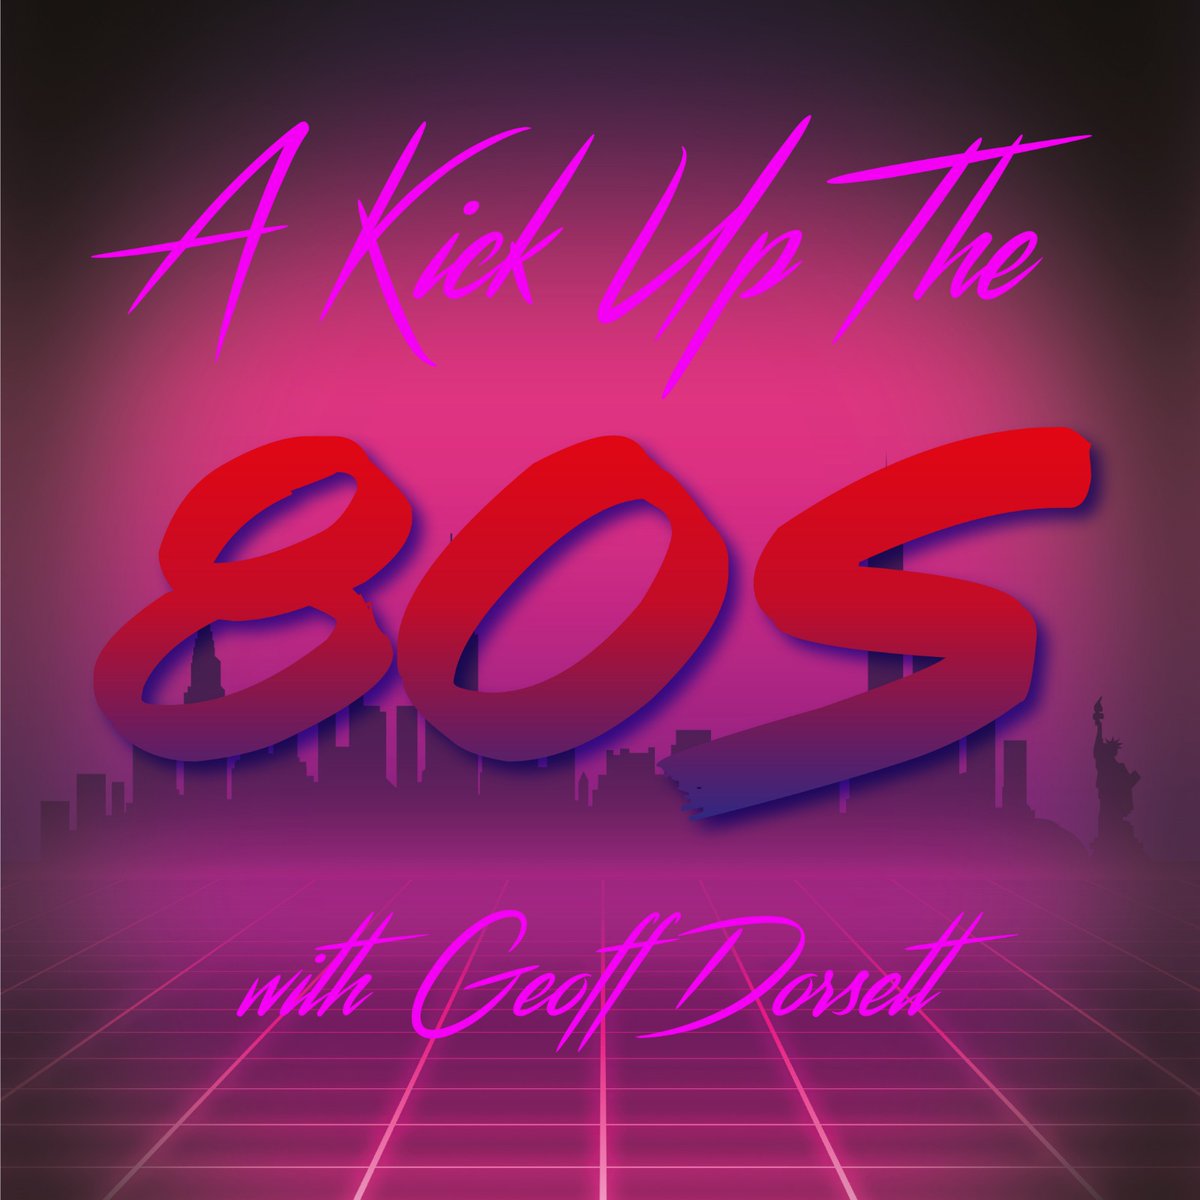 Love the 80s? Geoff Dorsett brings you A Kick up the 80s at 4pm.